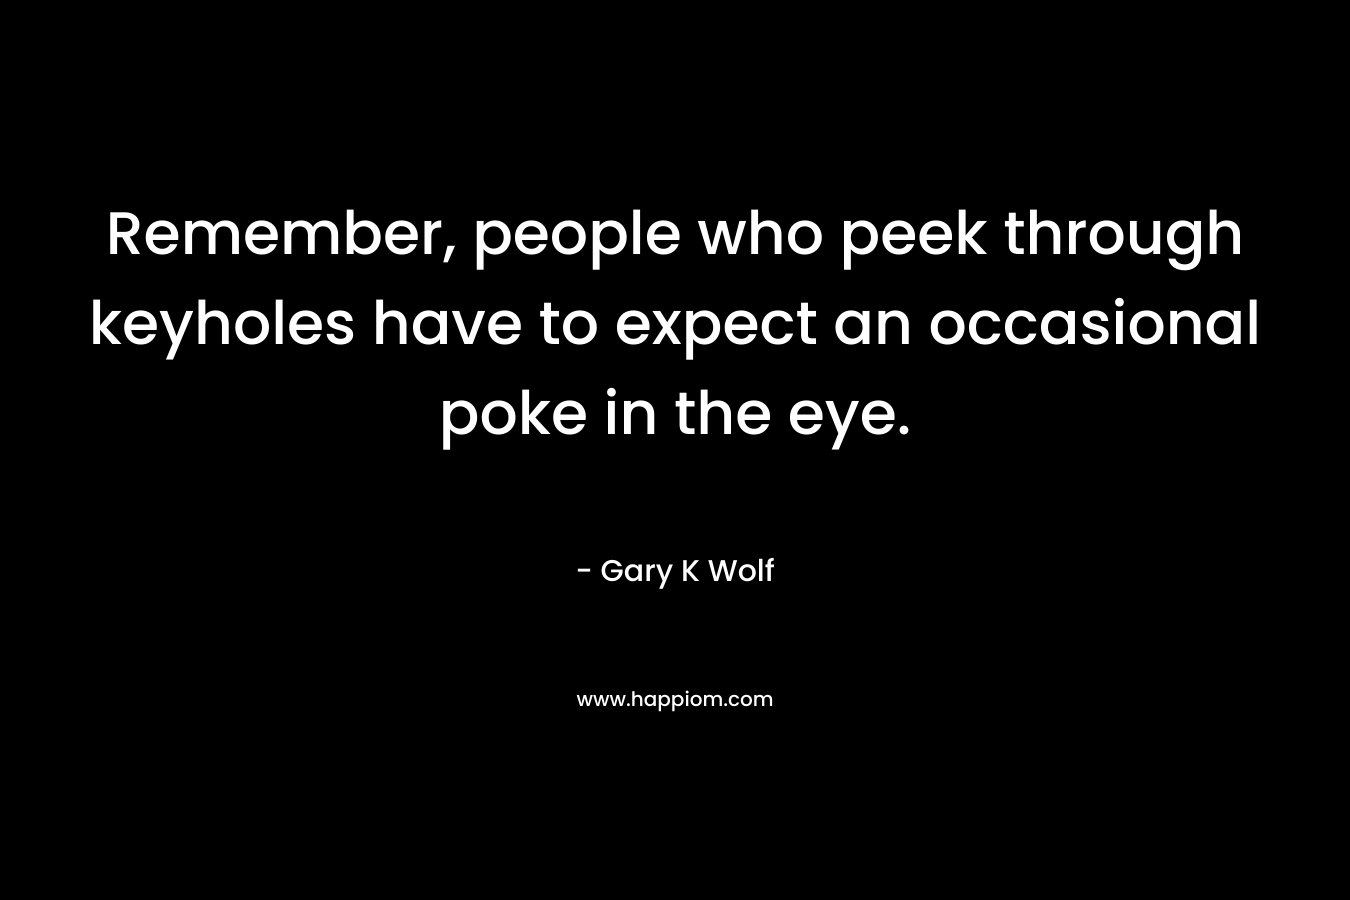 Remember, people who peek through keyholes have to expect an occasional poke in the eye.